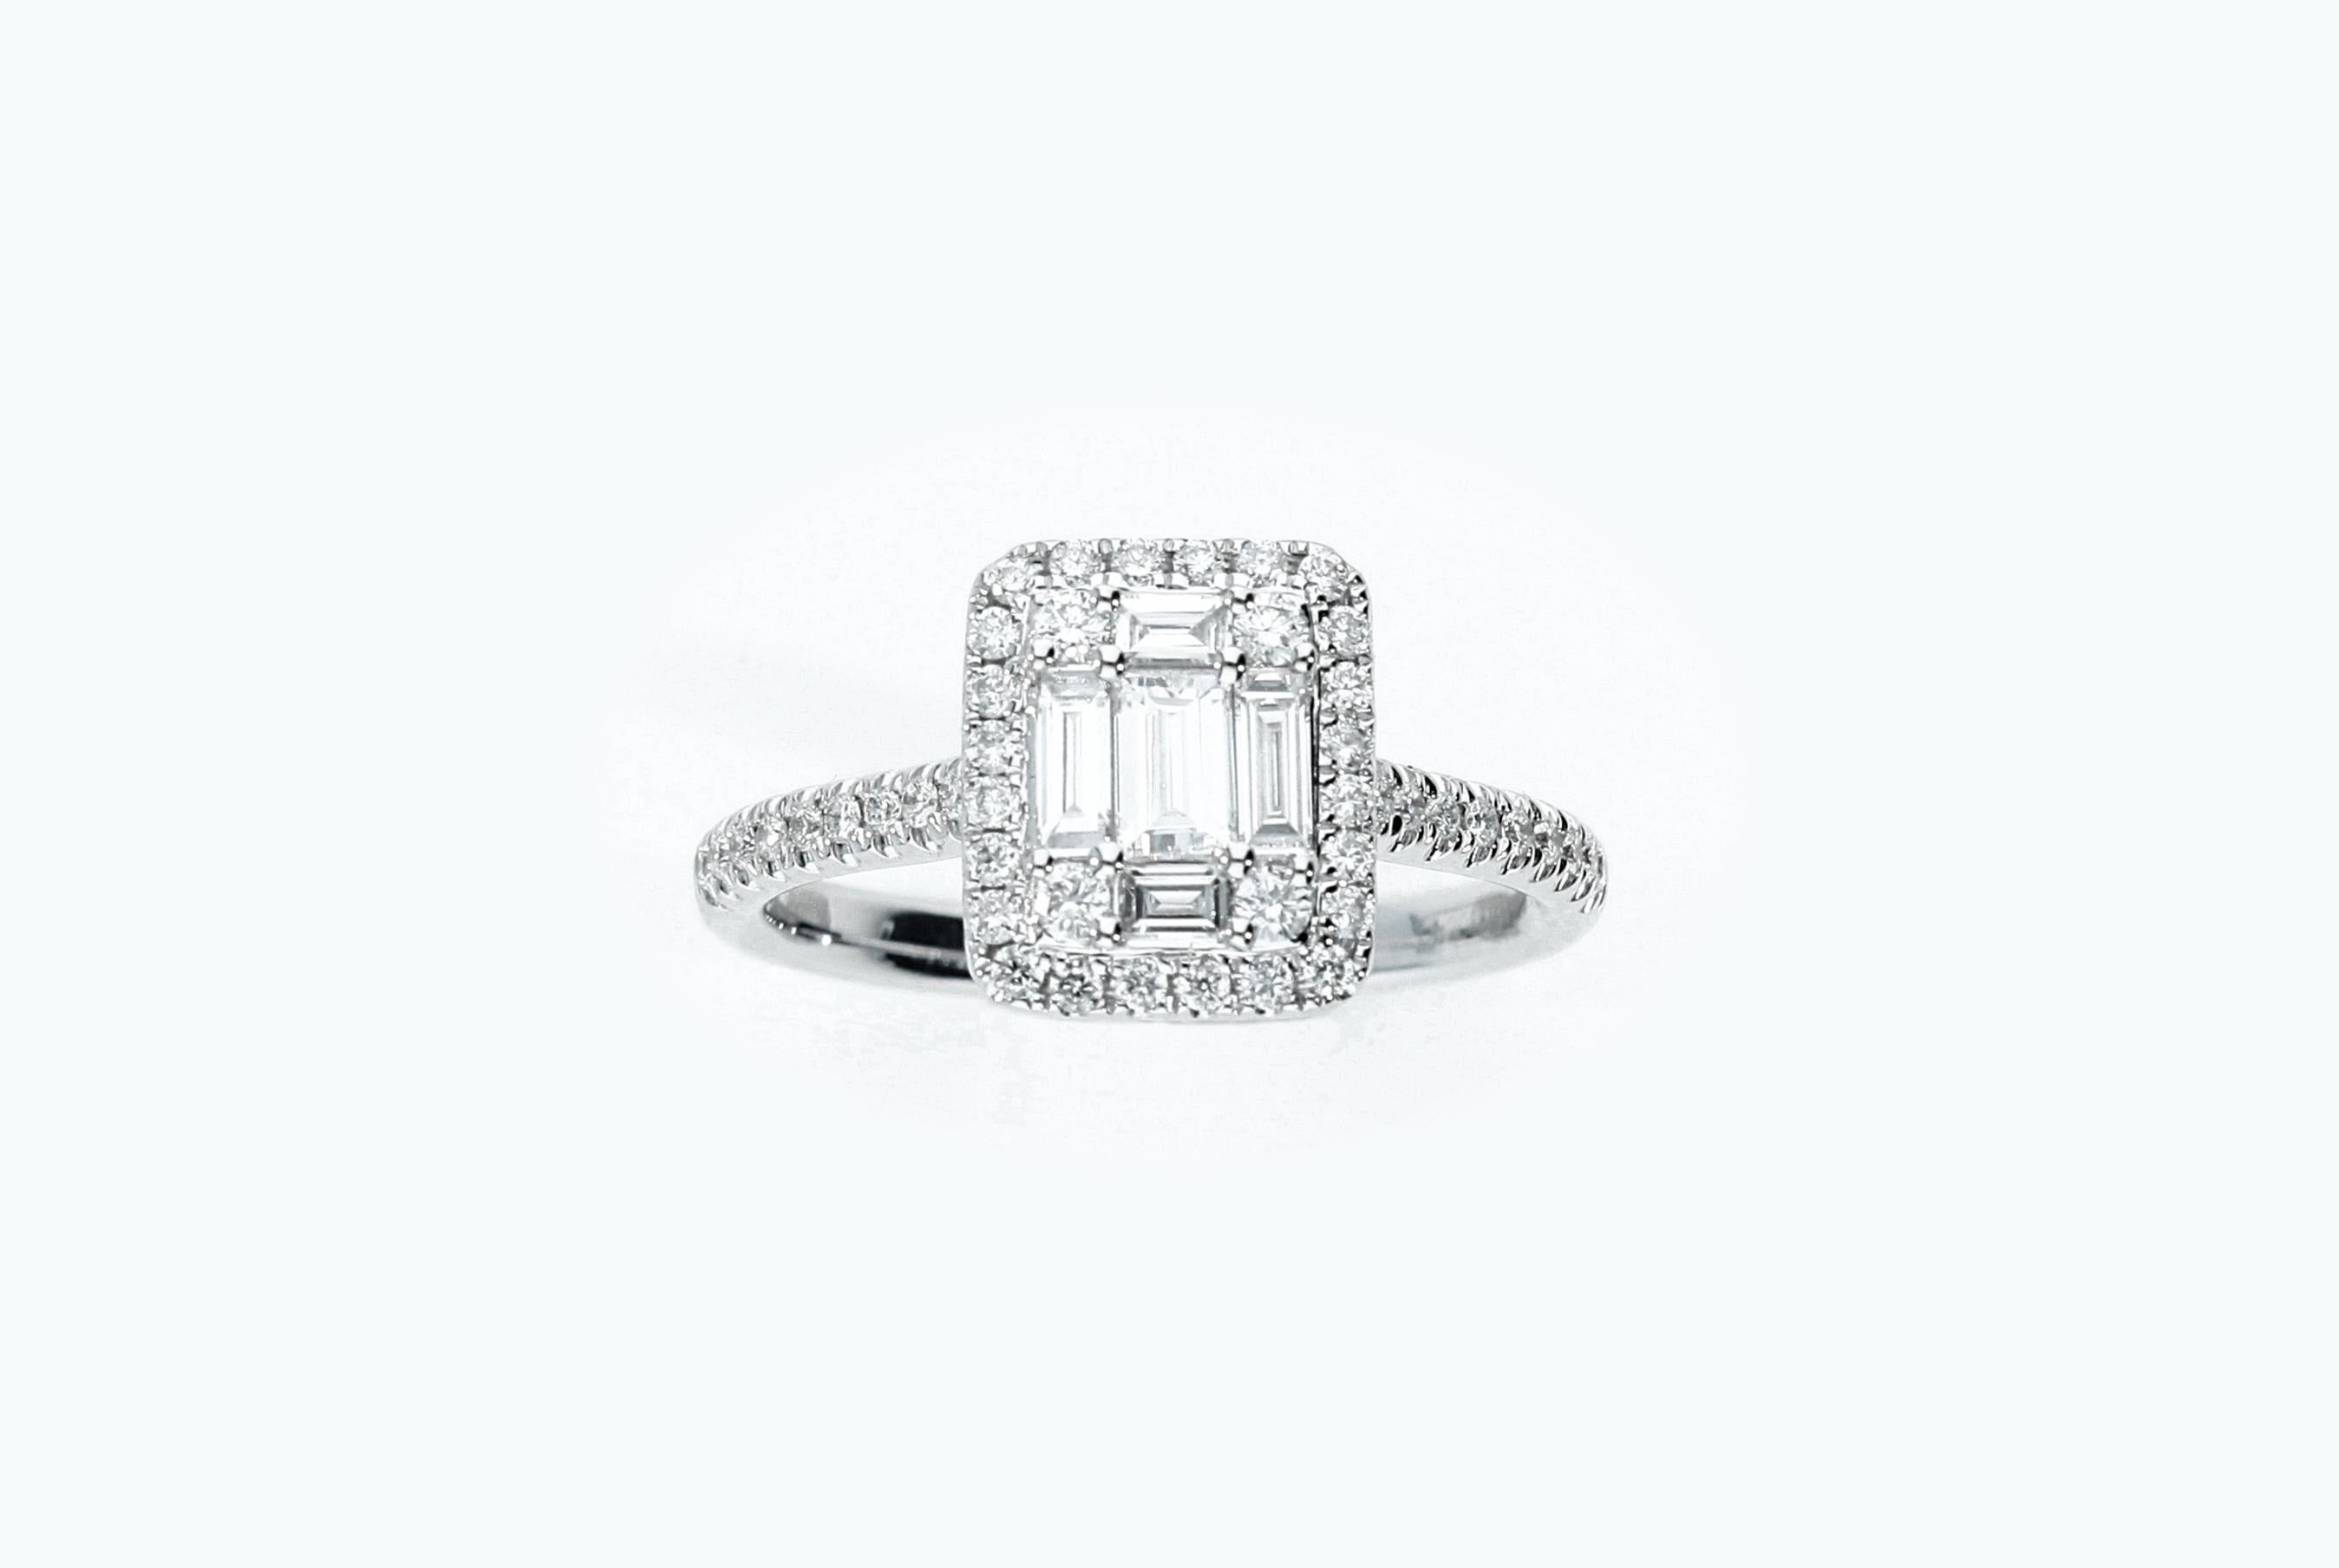 Ring with 5 baguette-cut diamonds and 46 brilliant-cut diamonds, for a total carat weight of 0.72 ct.
Contemporary ring in 18 Kt white gold.
The ring is made in Italy.

Total Diamonds Weight: ct. 0.72
Total Weight of 18 Kt Gold: 3.5 grams
Number of